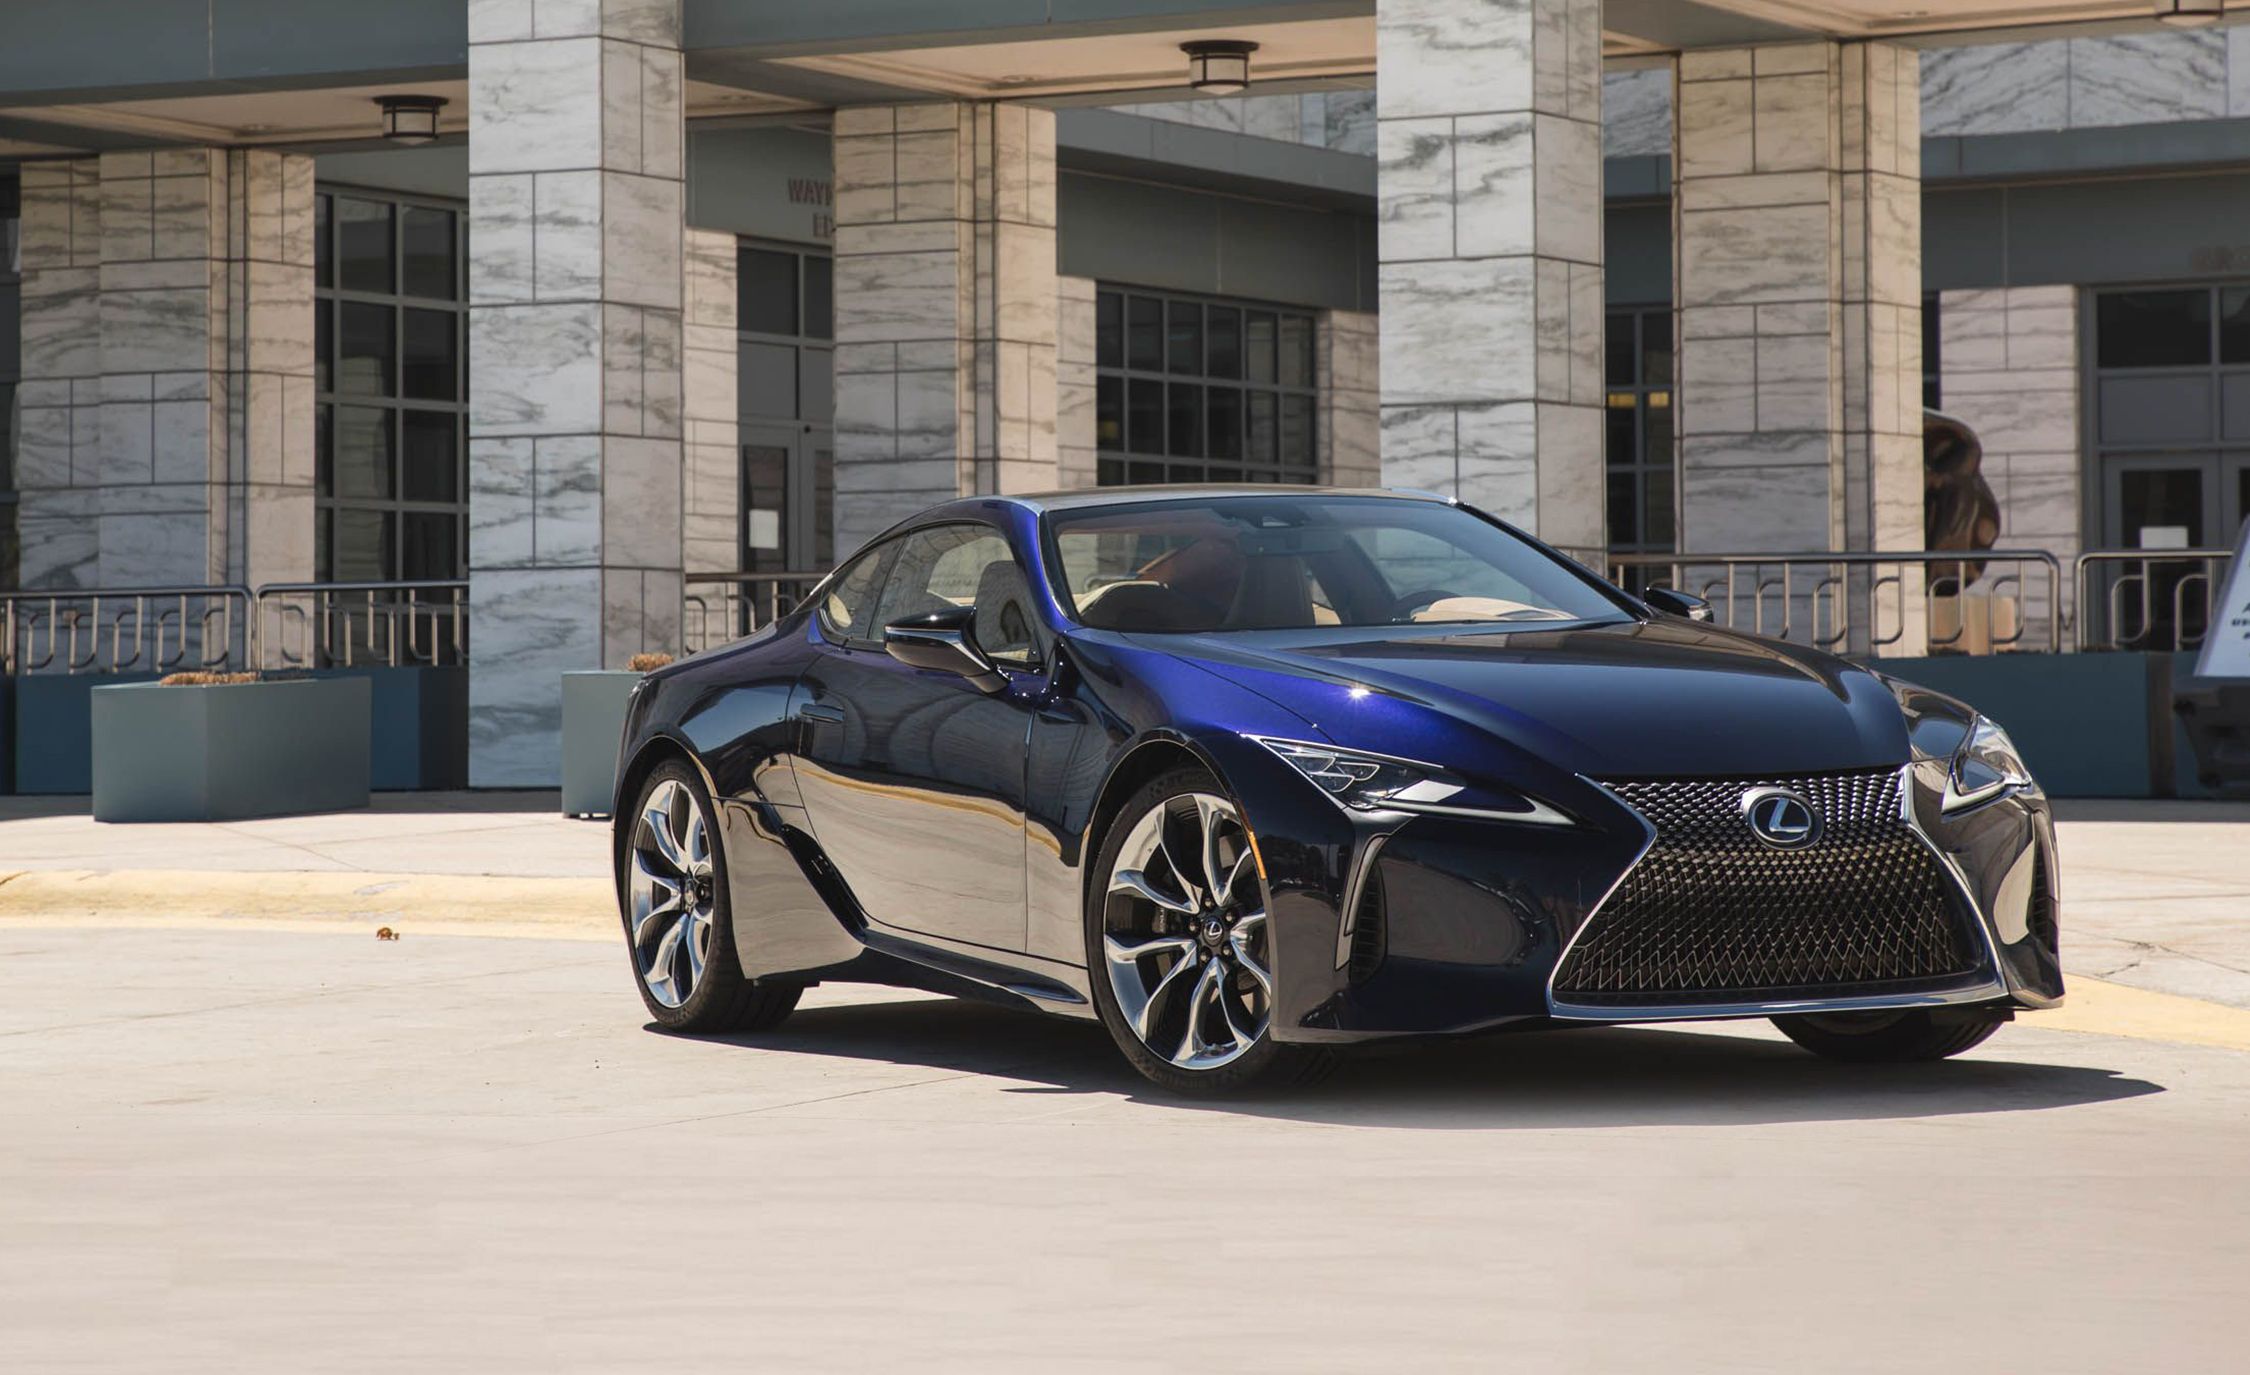 2019 Lexus Lc Review, Pricing, And Specs